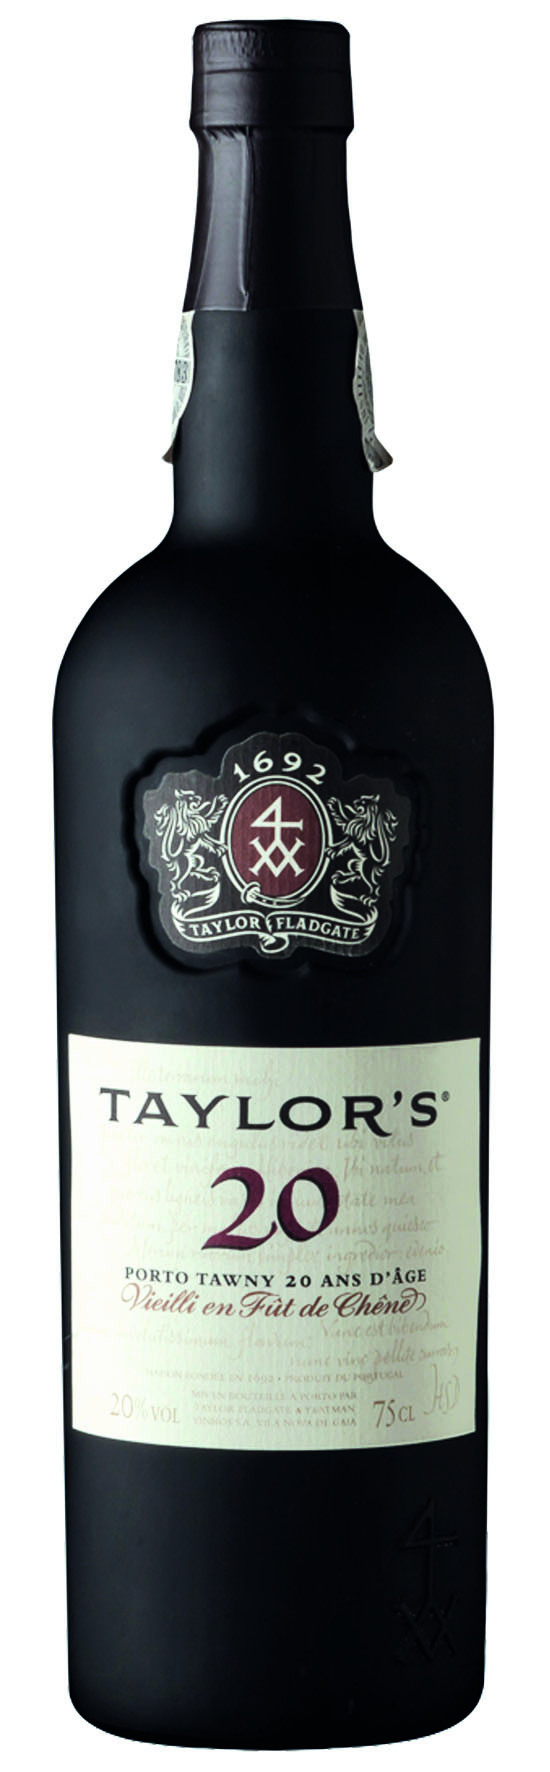 Taylor's Tawny 20 years 20 % 0.75L